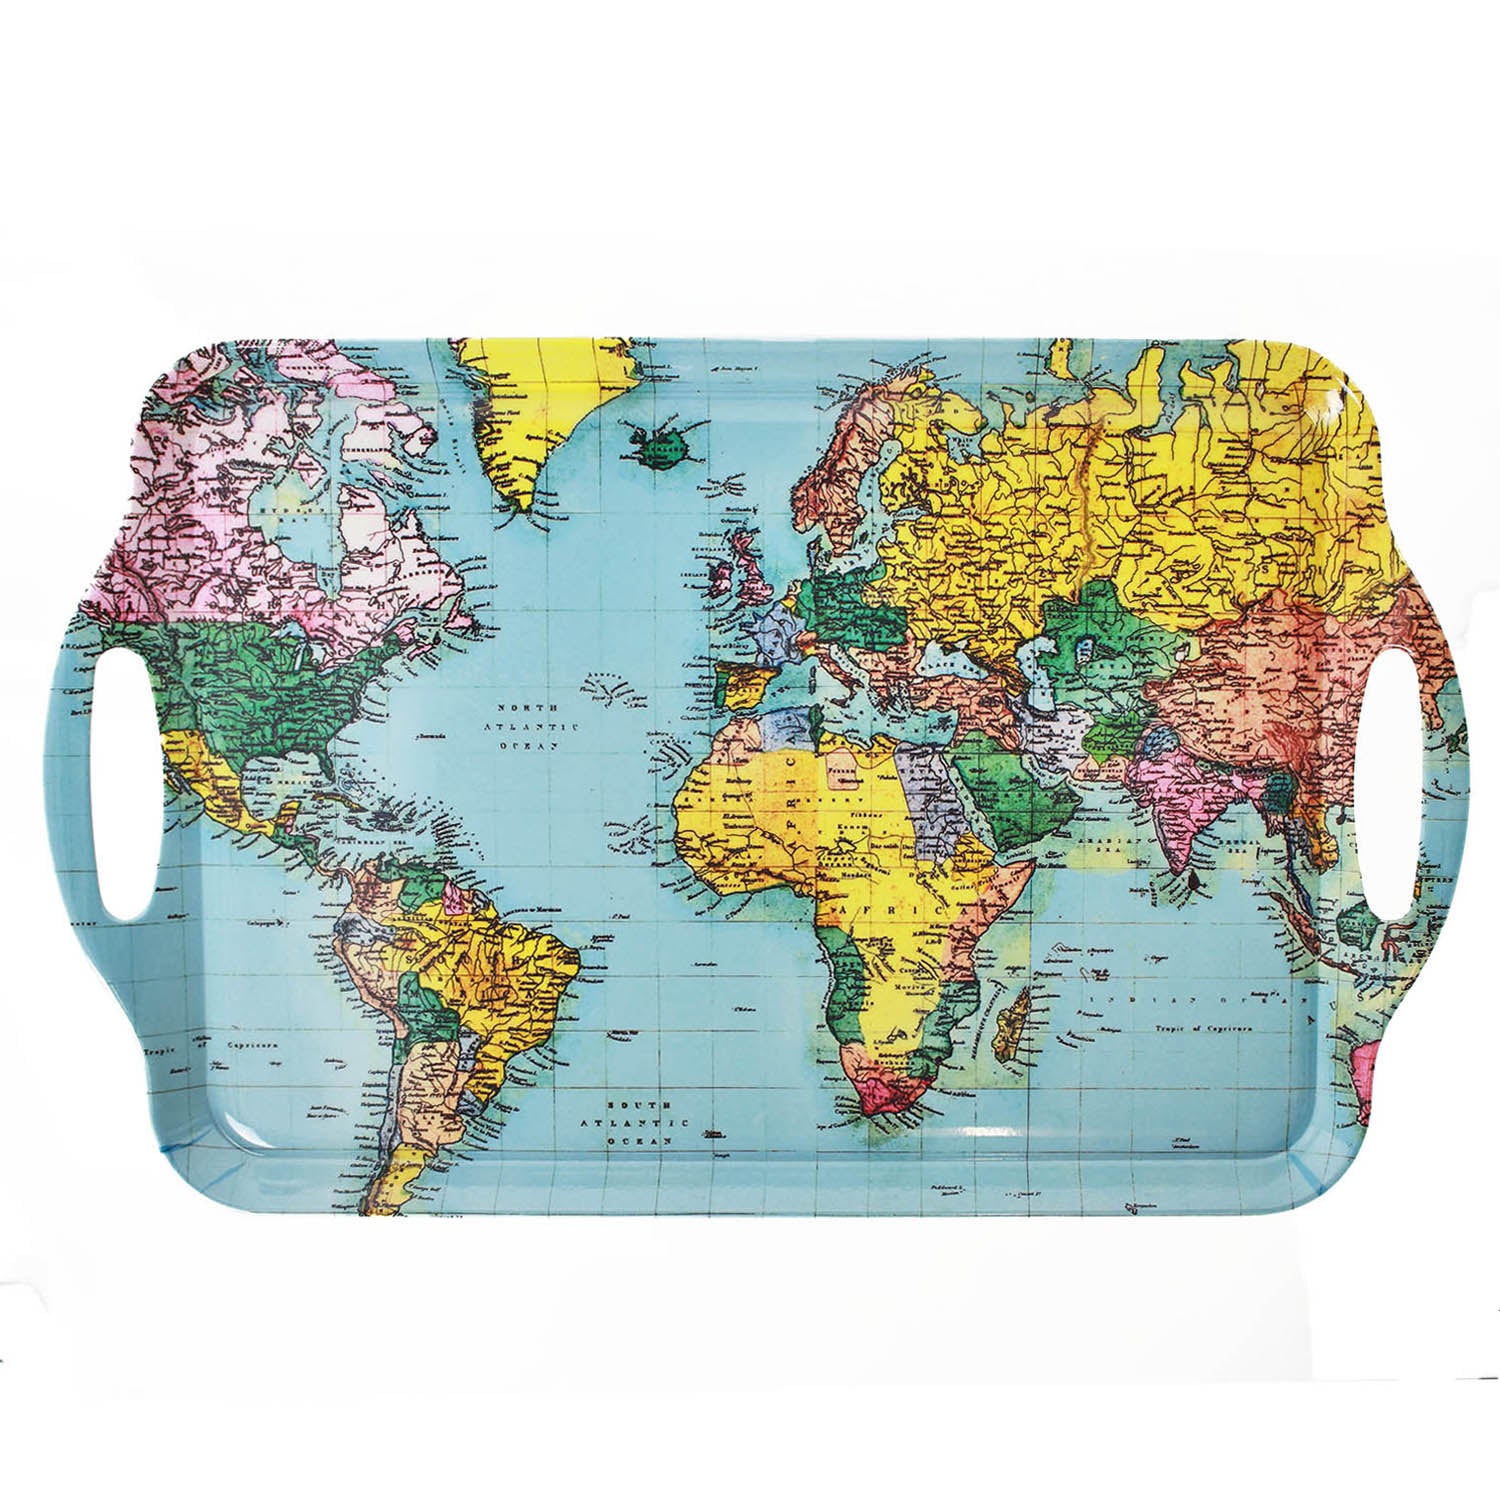 38x24cm World Traveller Map Large Serving Tray